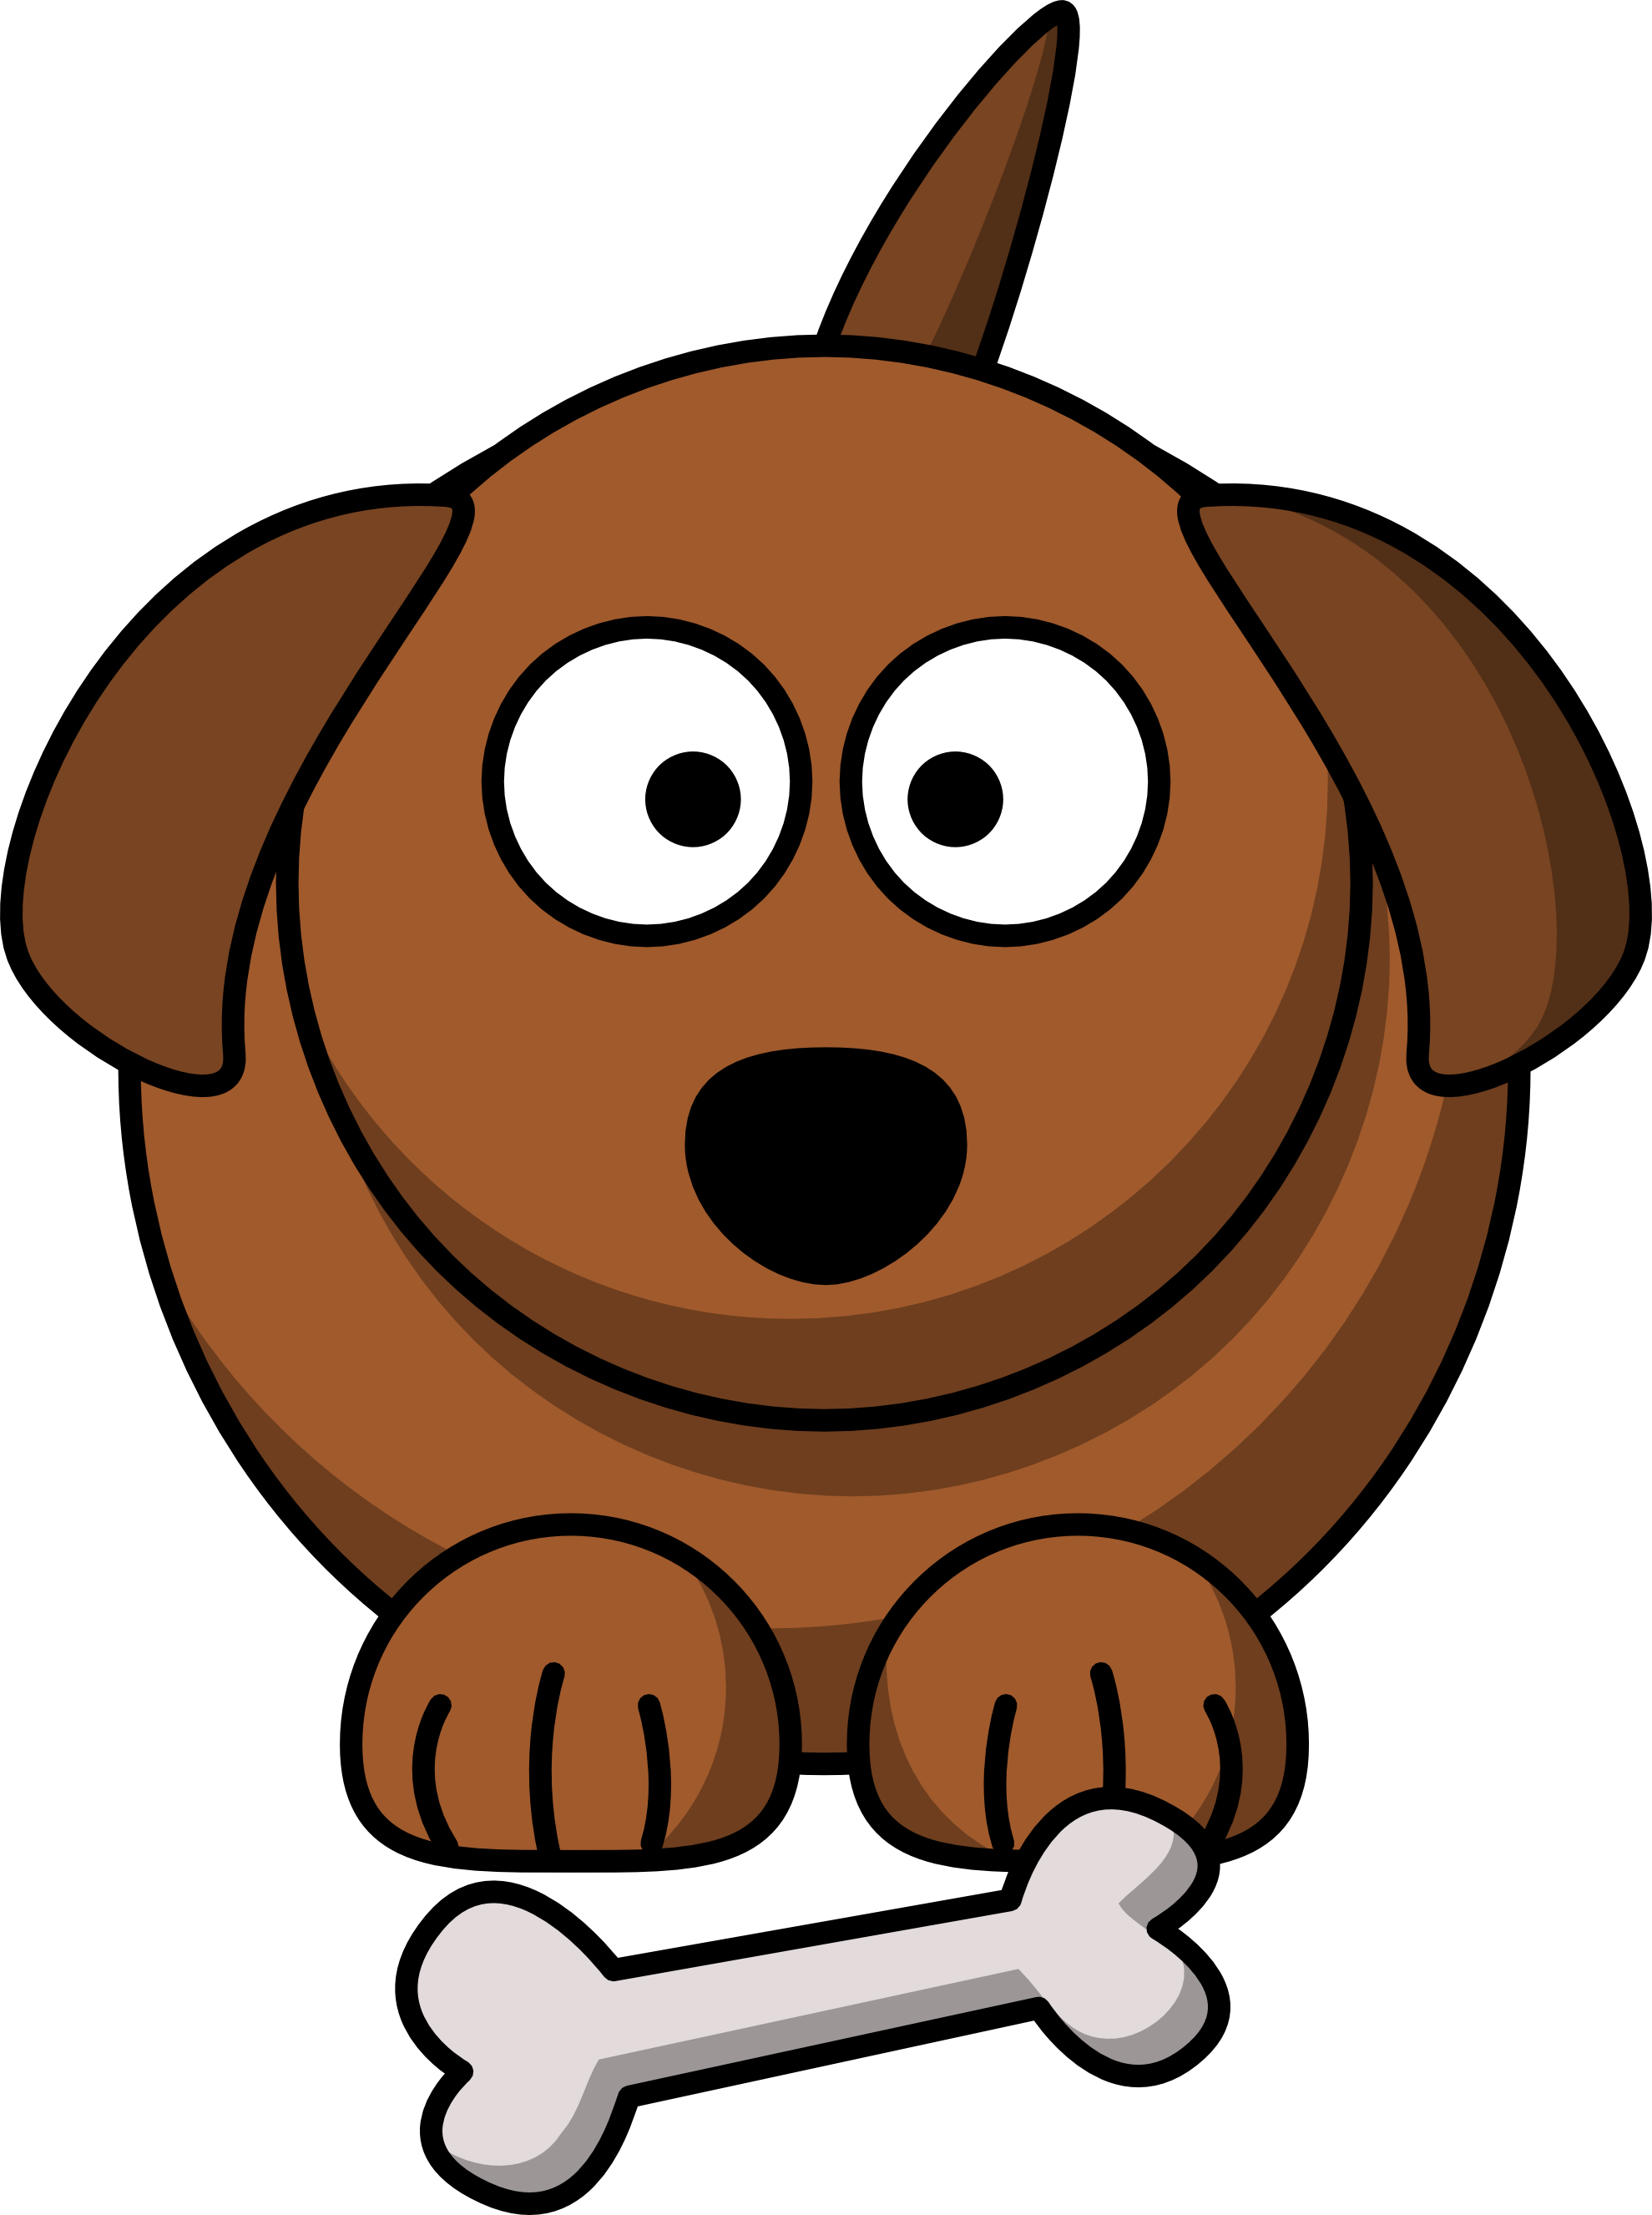 ... Dog toy clip art free clipart images - Cliparting clipartall.com ...